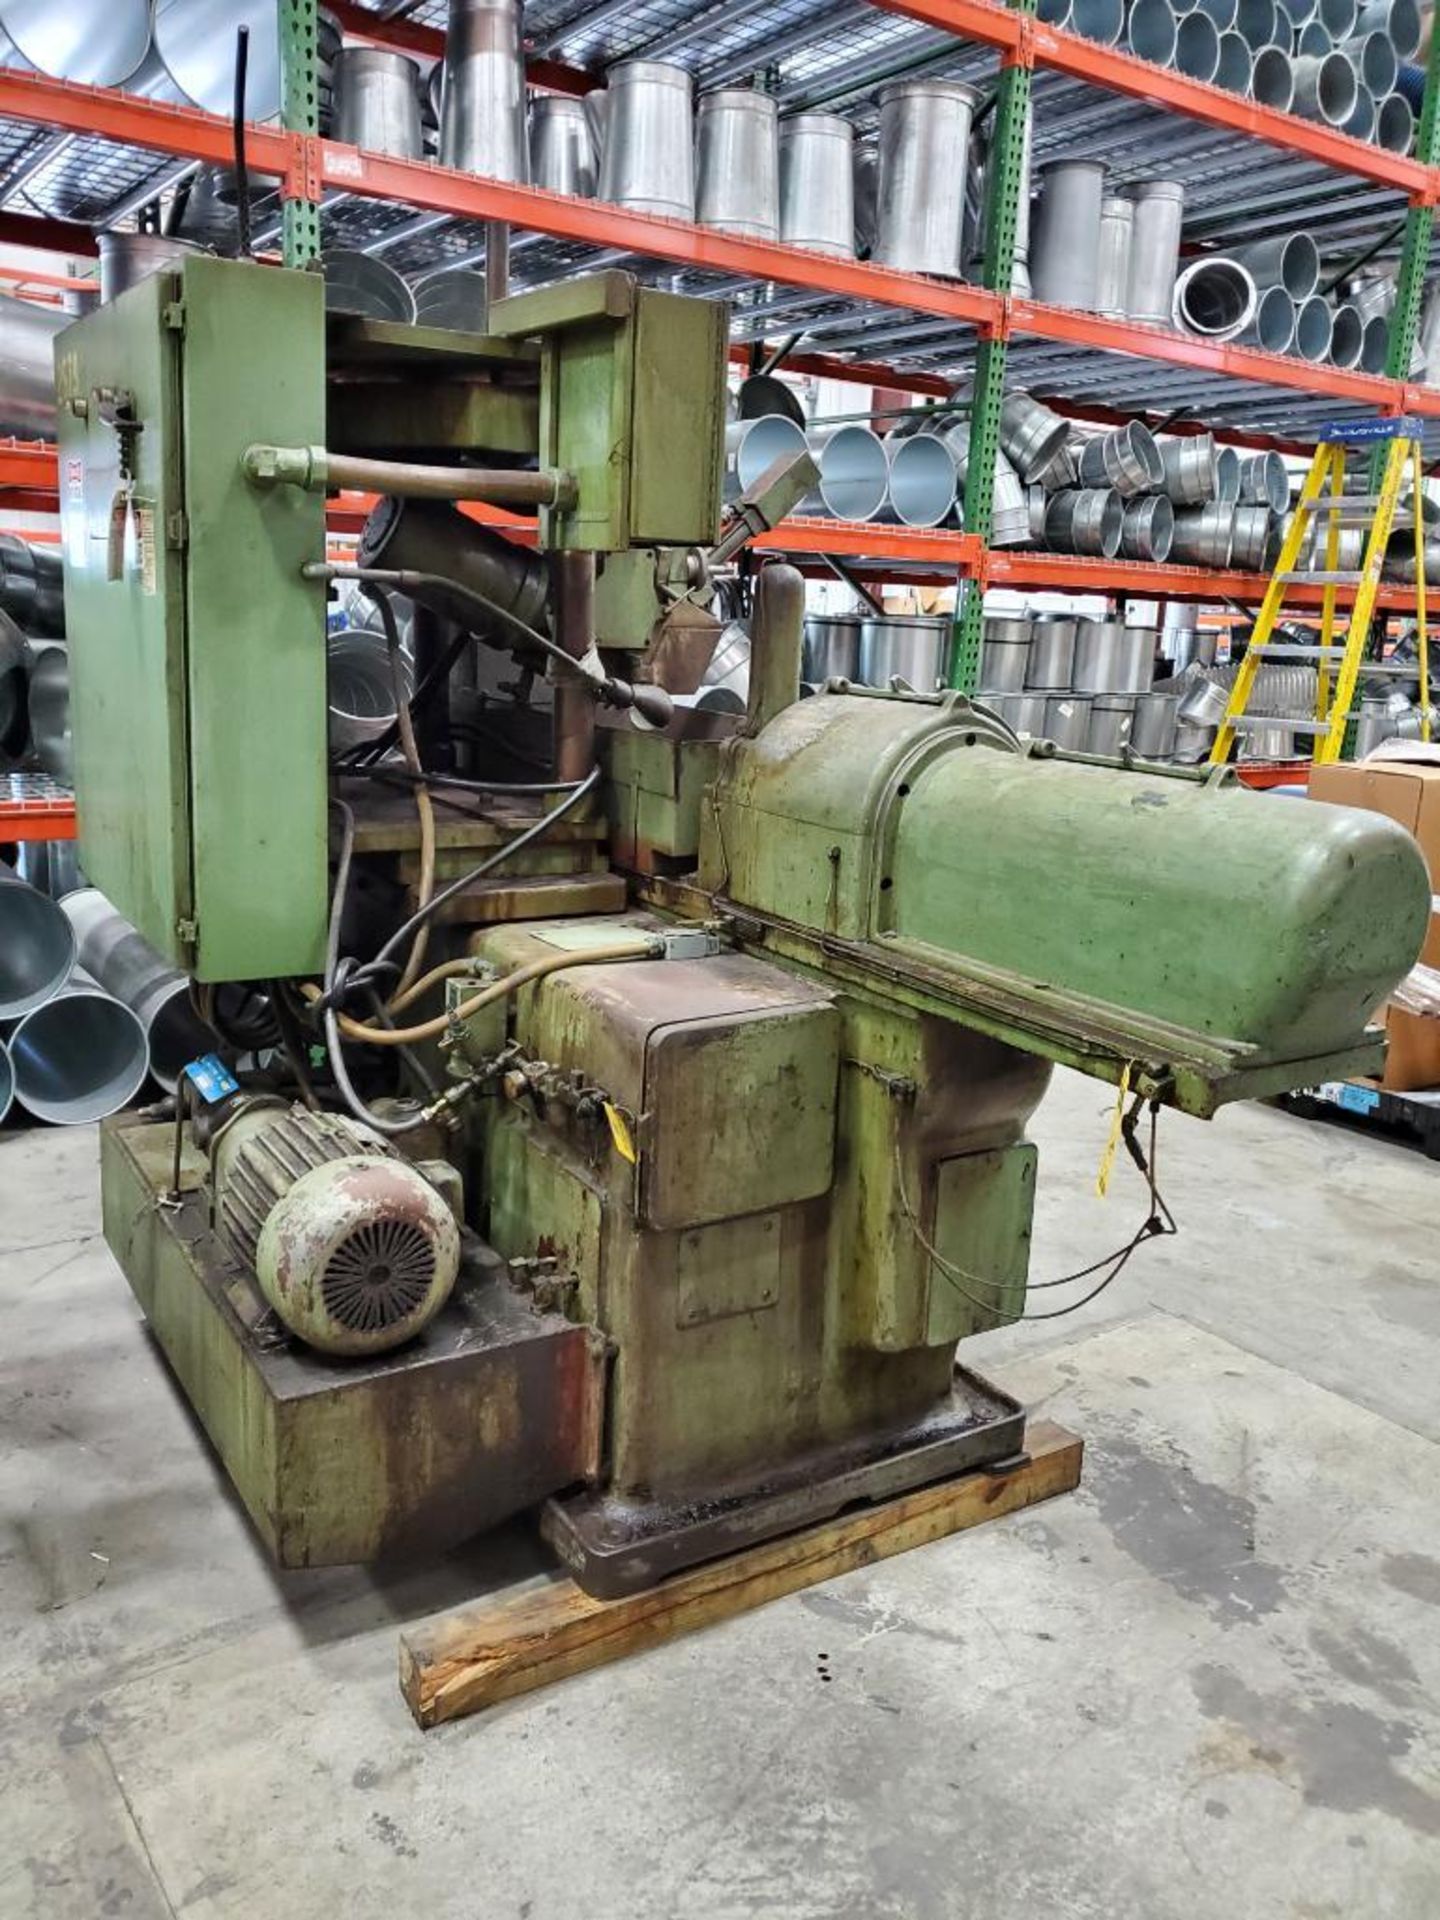 Star-Cutter Hydraulic OD Grinder/Dresser, Model 11X16, S/N B-0002-71, Manual/ Continuous Operation - Image 4 of 11